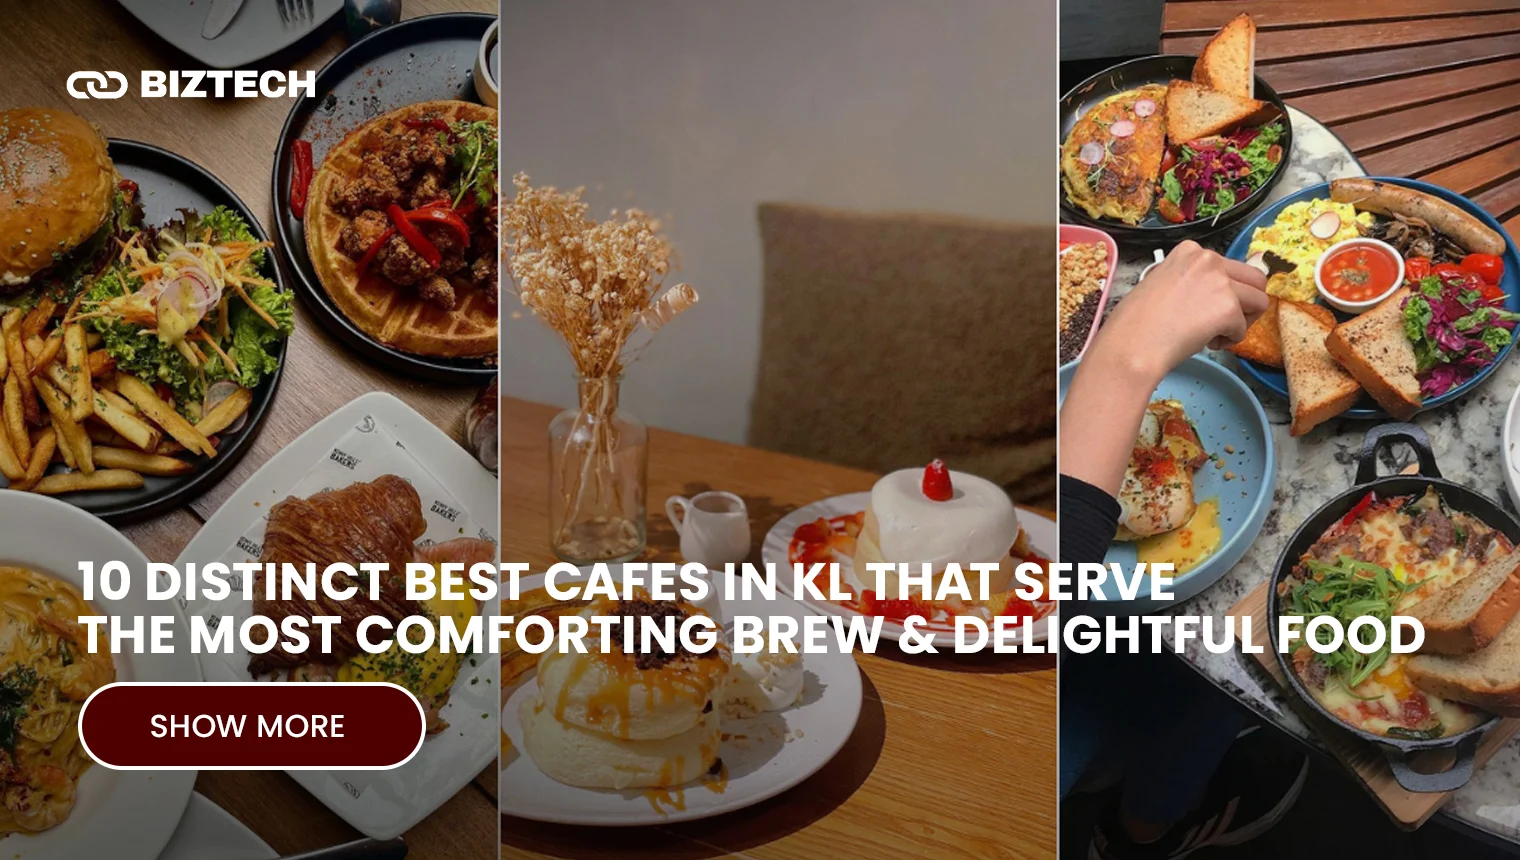 10 Distinct Best Cafes in KL That Serve The Most Comforting Brew & Delightful Food